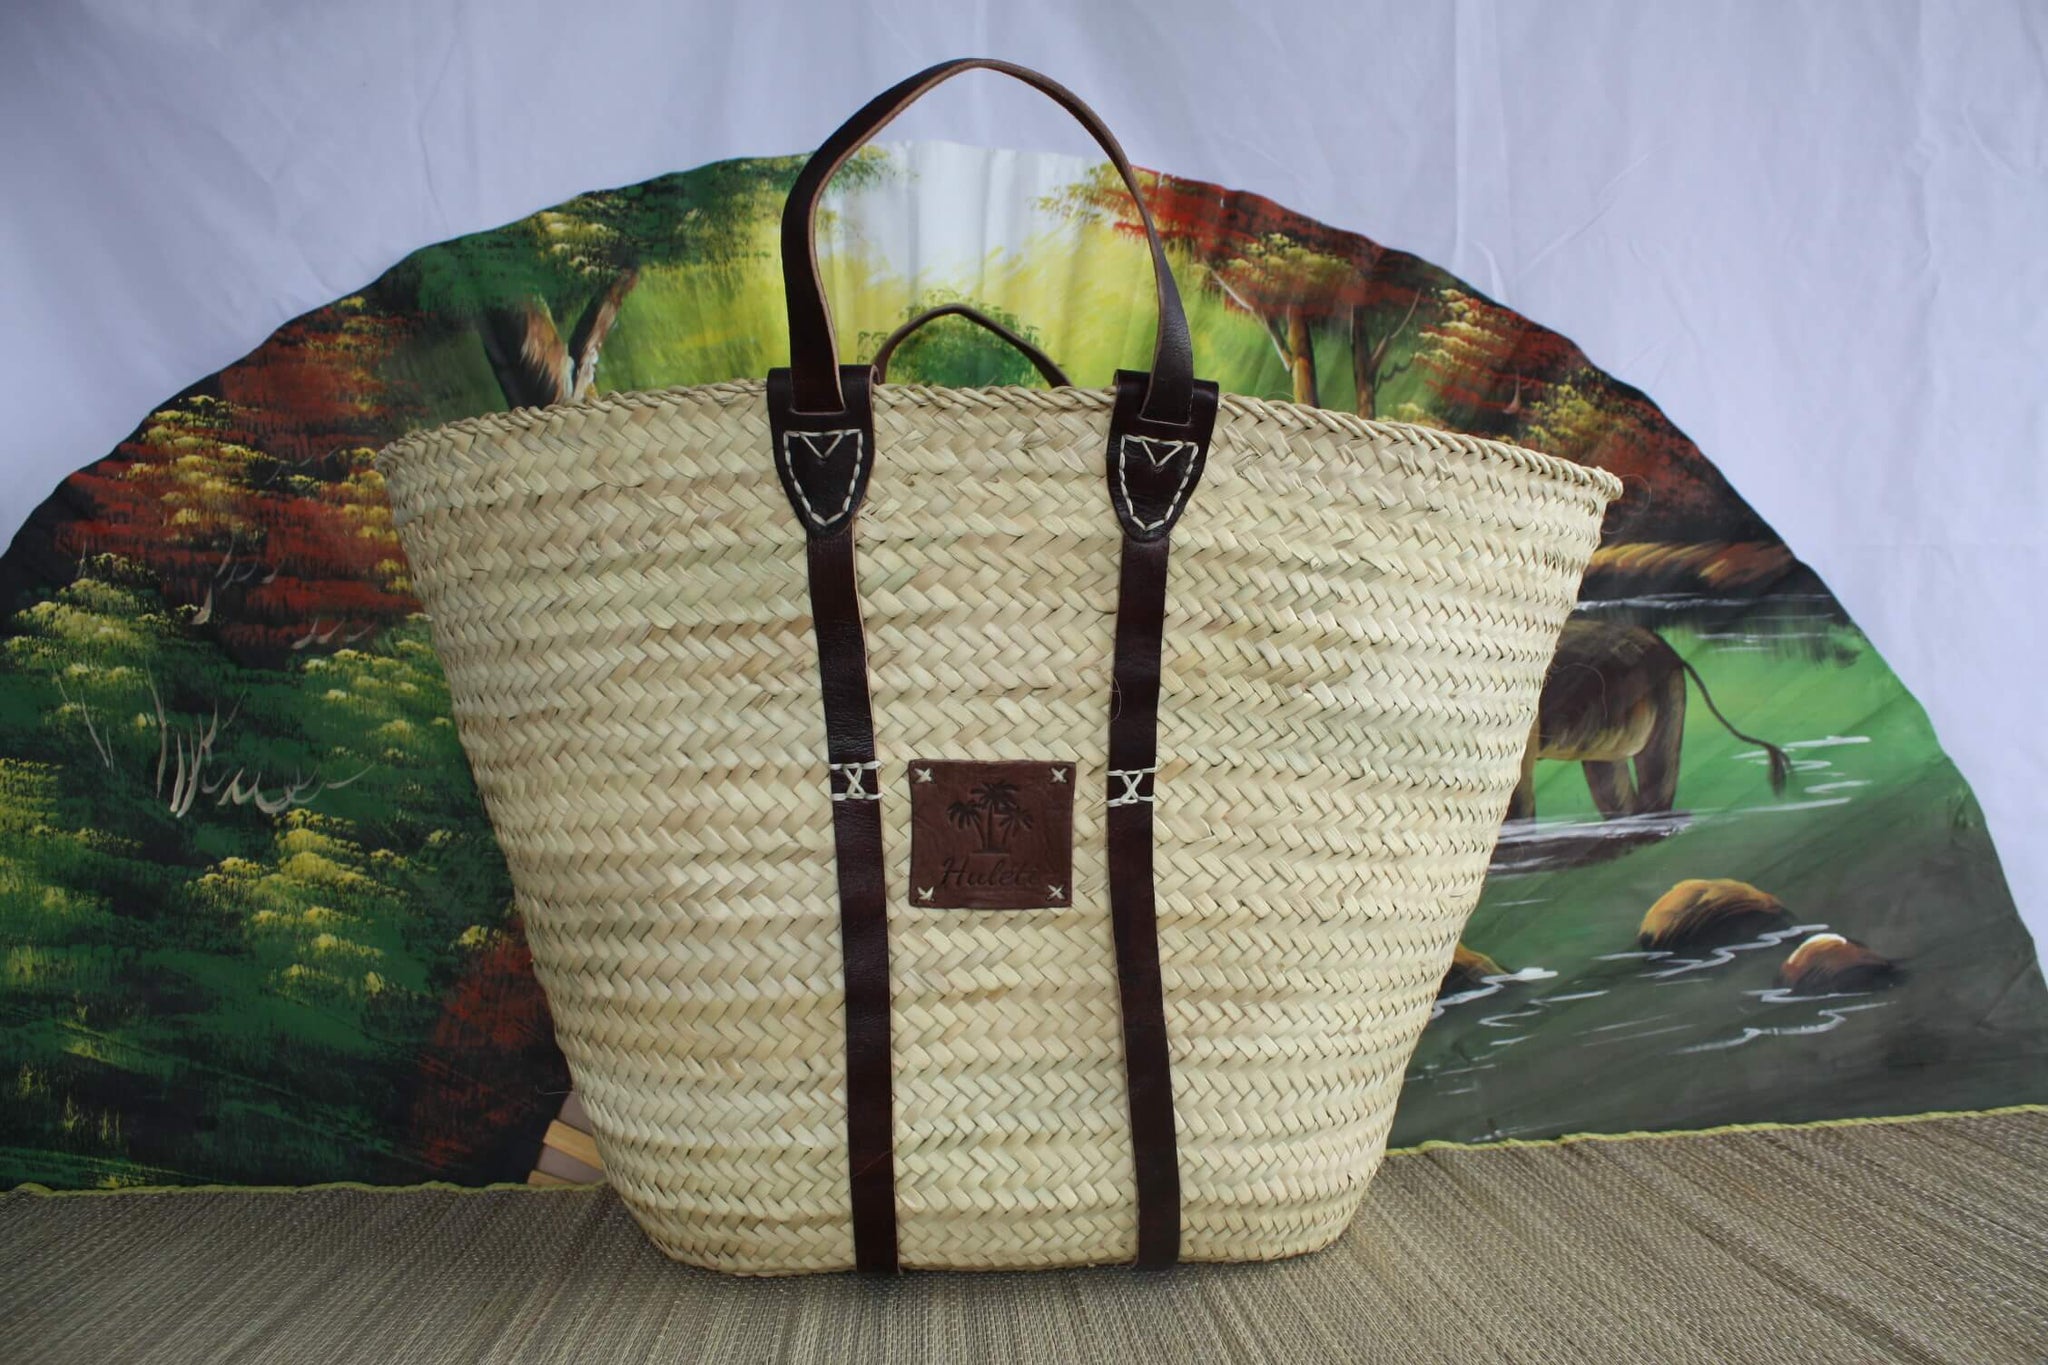 LARGE HUGE XXL basket for beach market shopping - Moroccan straw wicker tote bag rattan palm tree